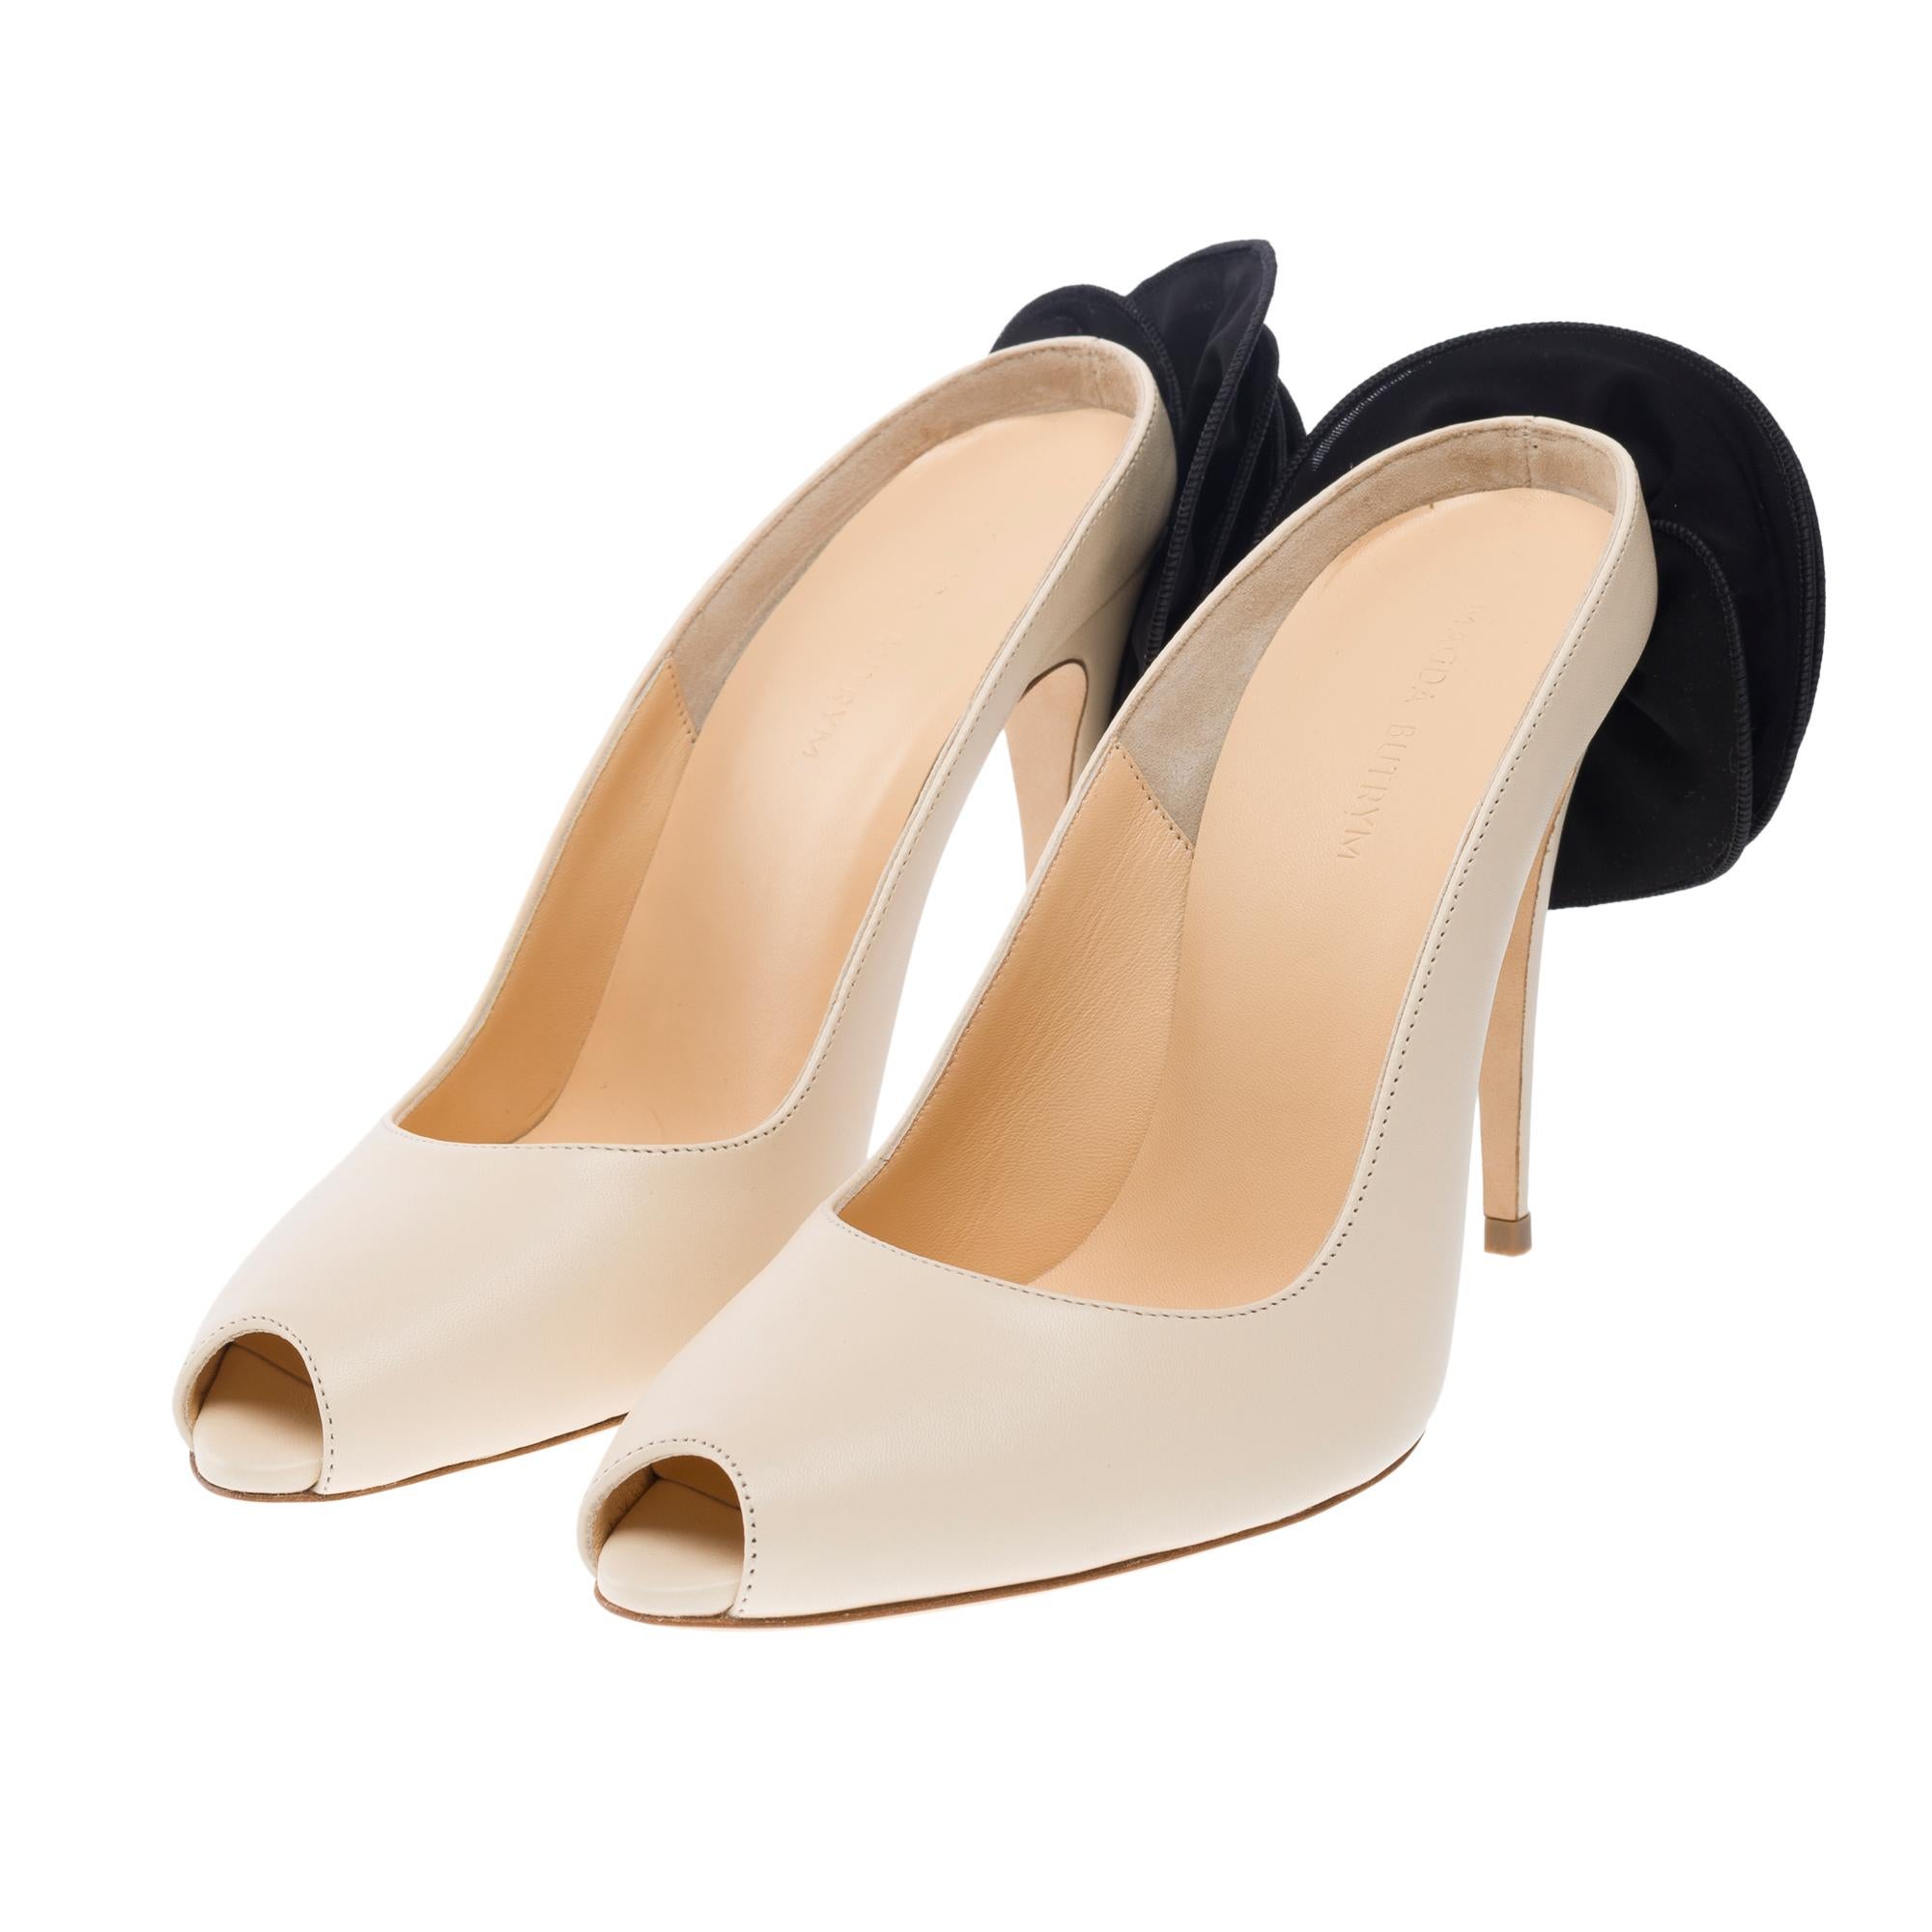 New Magda Butrym Peep Toe Mules in Cream leather , Size 38 In New Condition For Sale In Paris, IDF